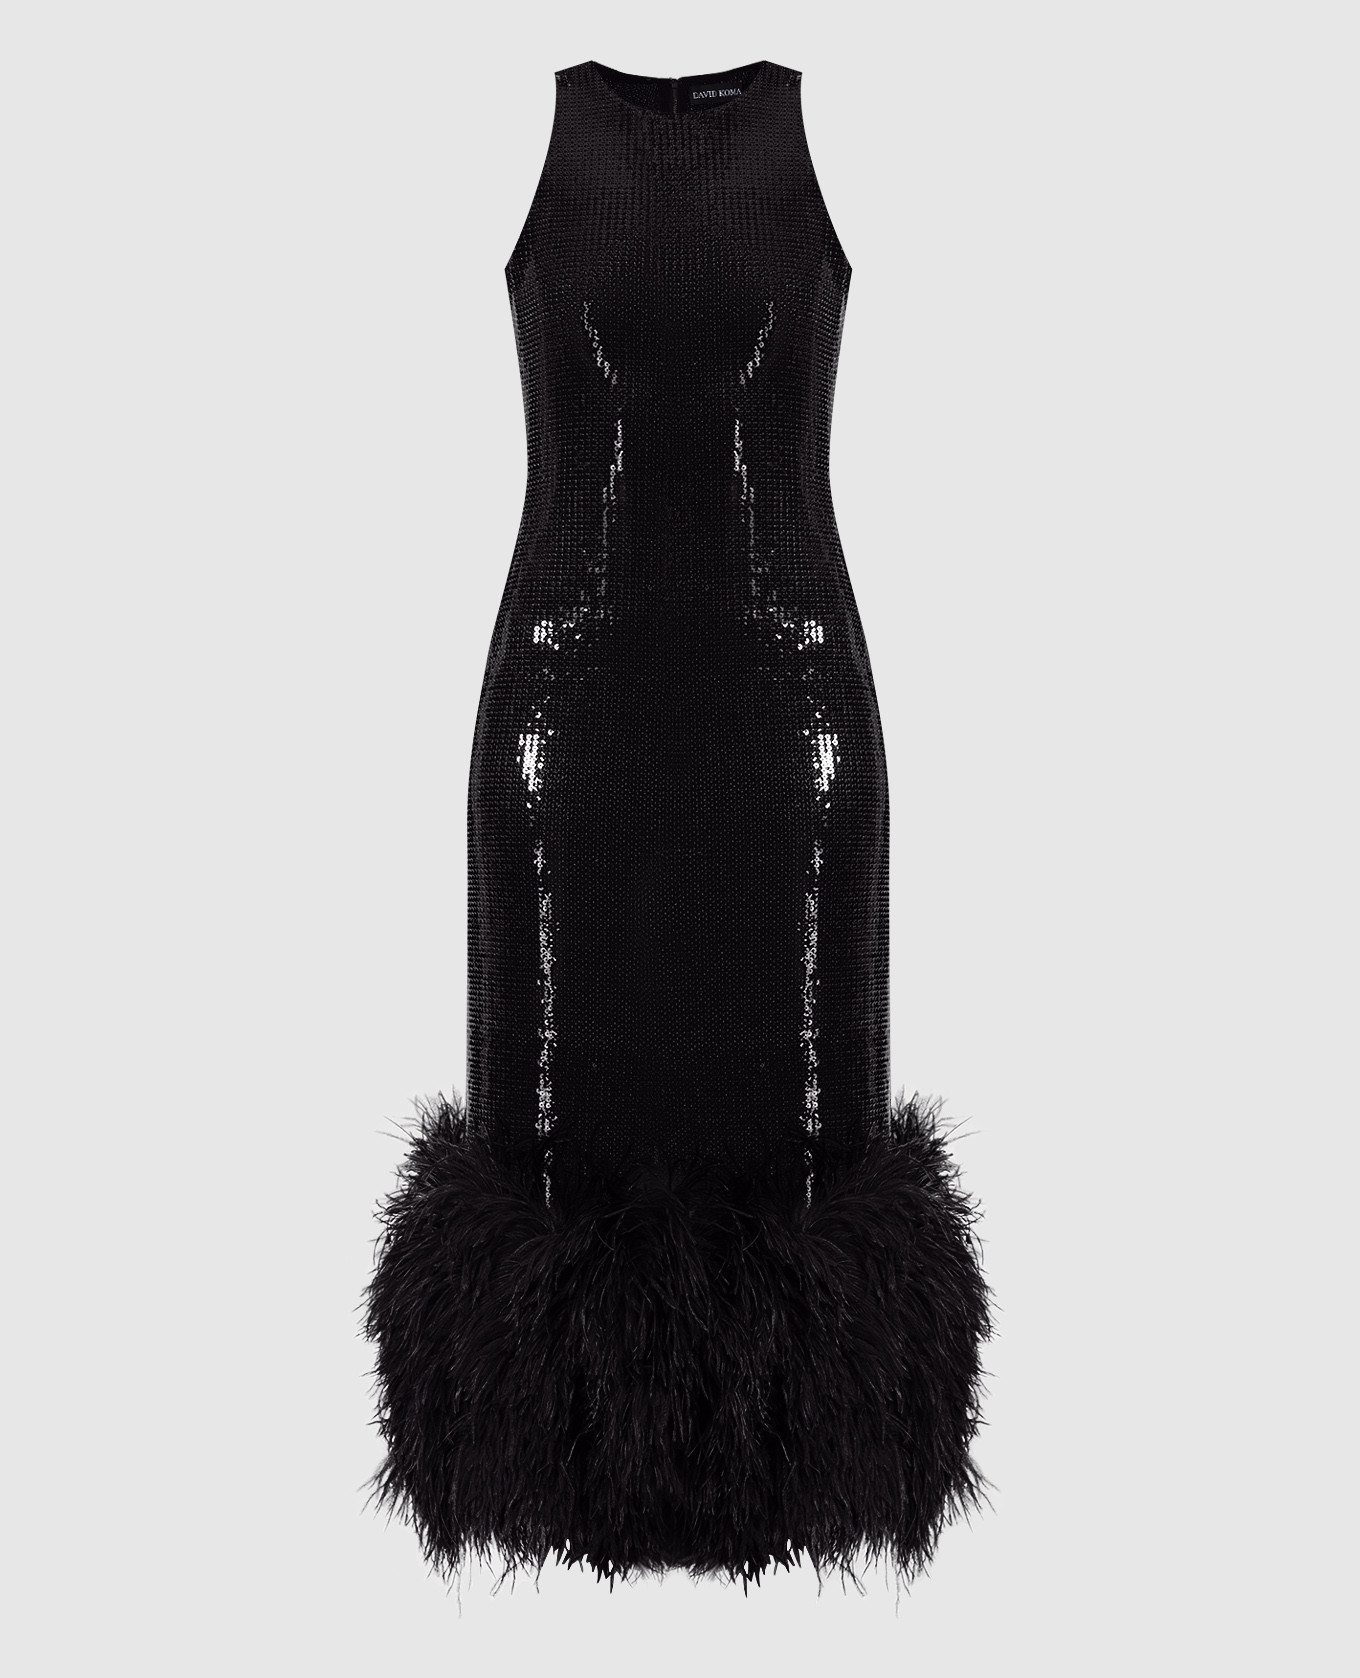 Black dress with sequins and ostrich feathers